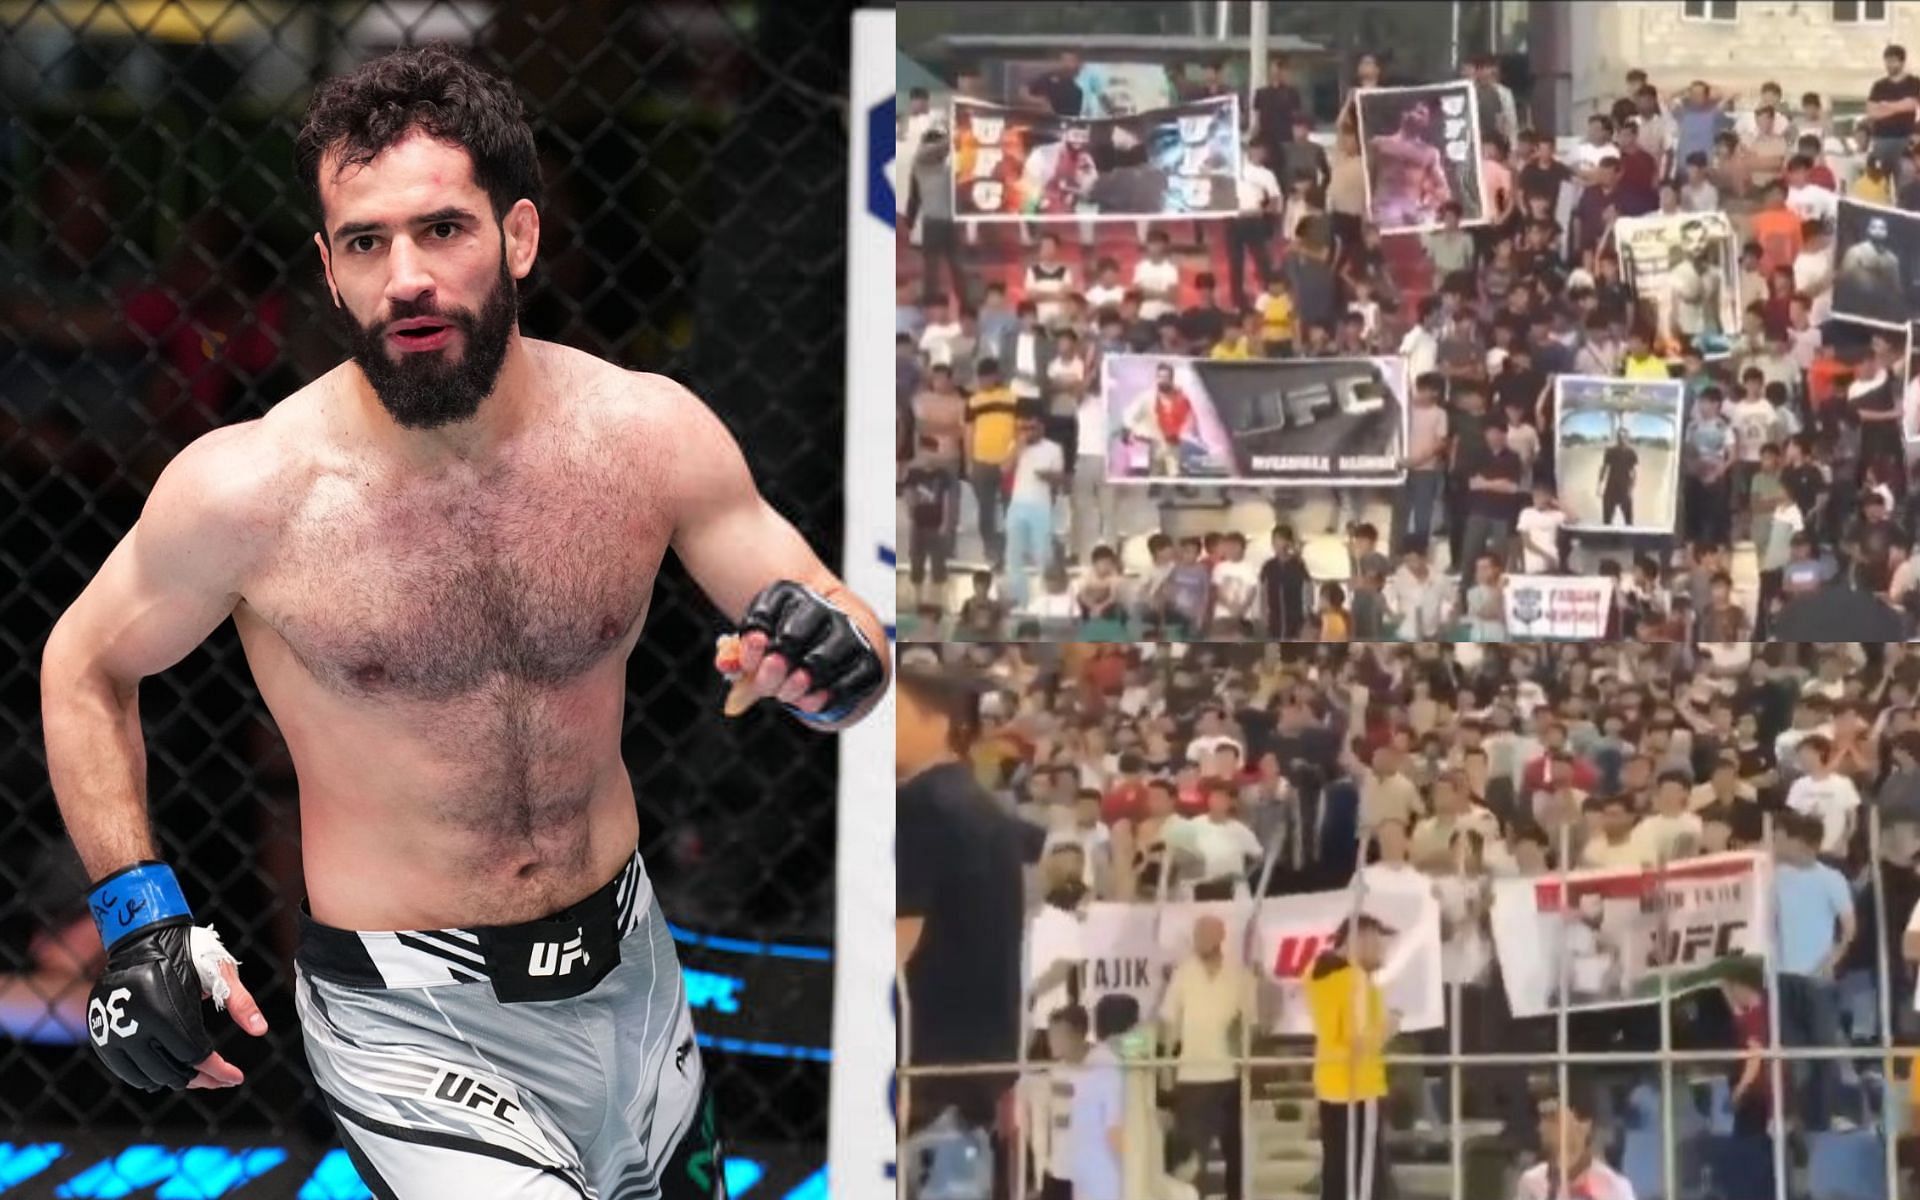 Sold-out arena in Tajikistan showing support for UFC debutant Muhammad Naimov